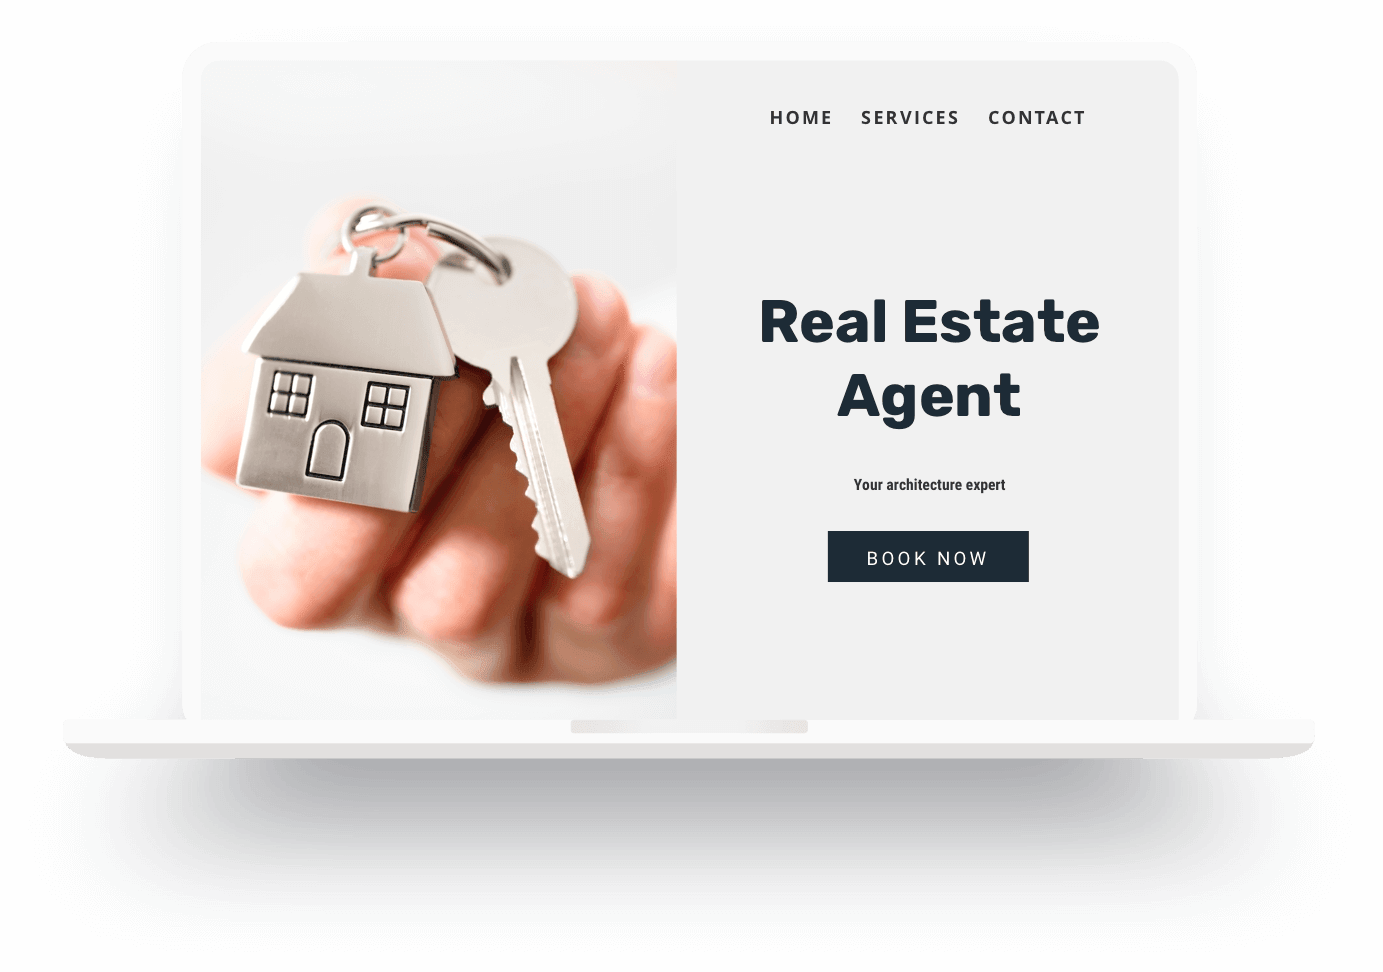 Example of a real estate agent website built with Jimdo